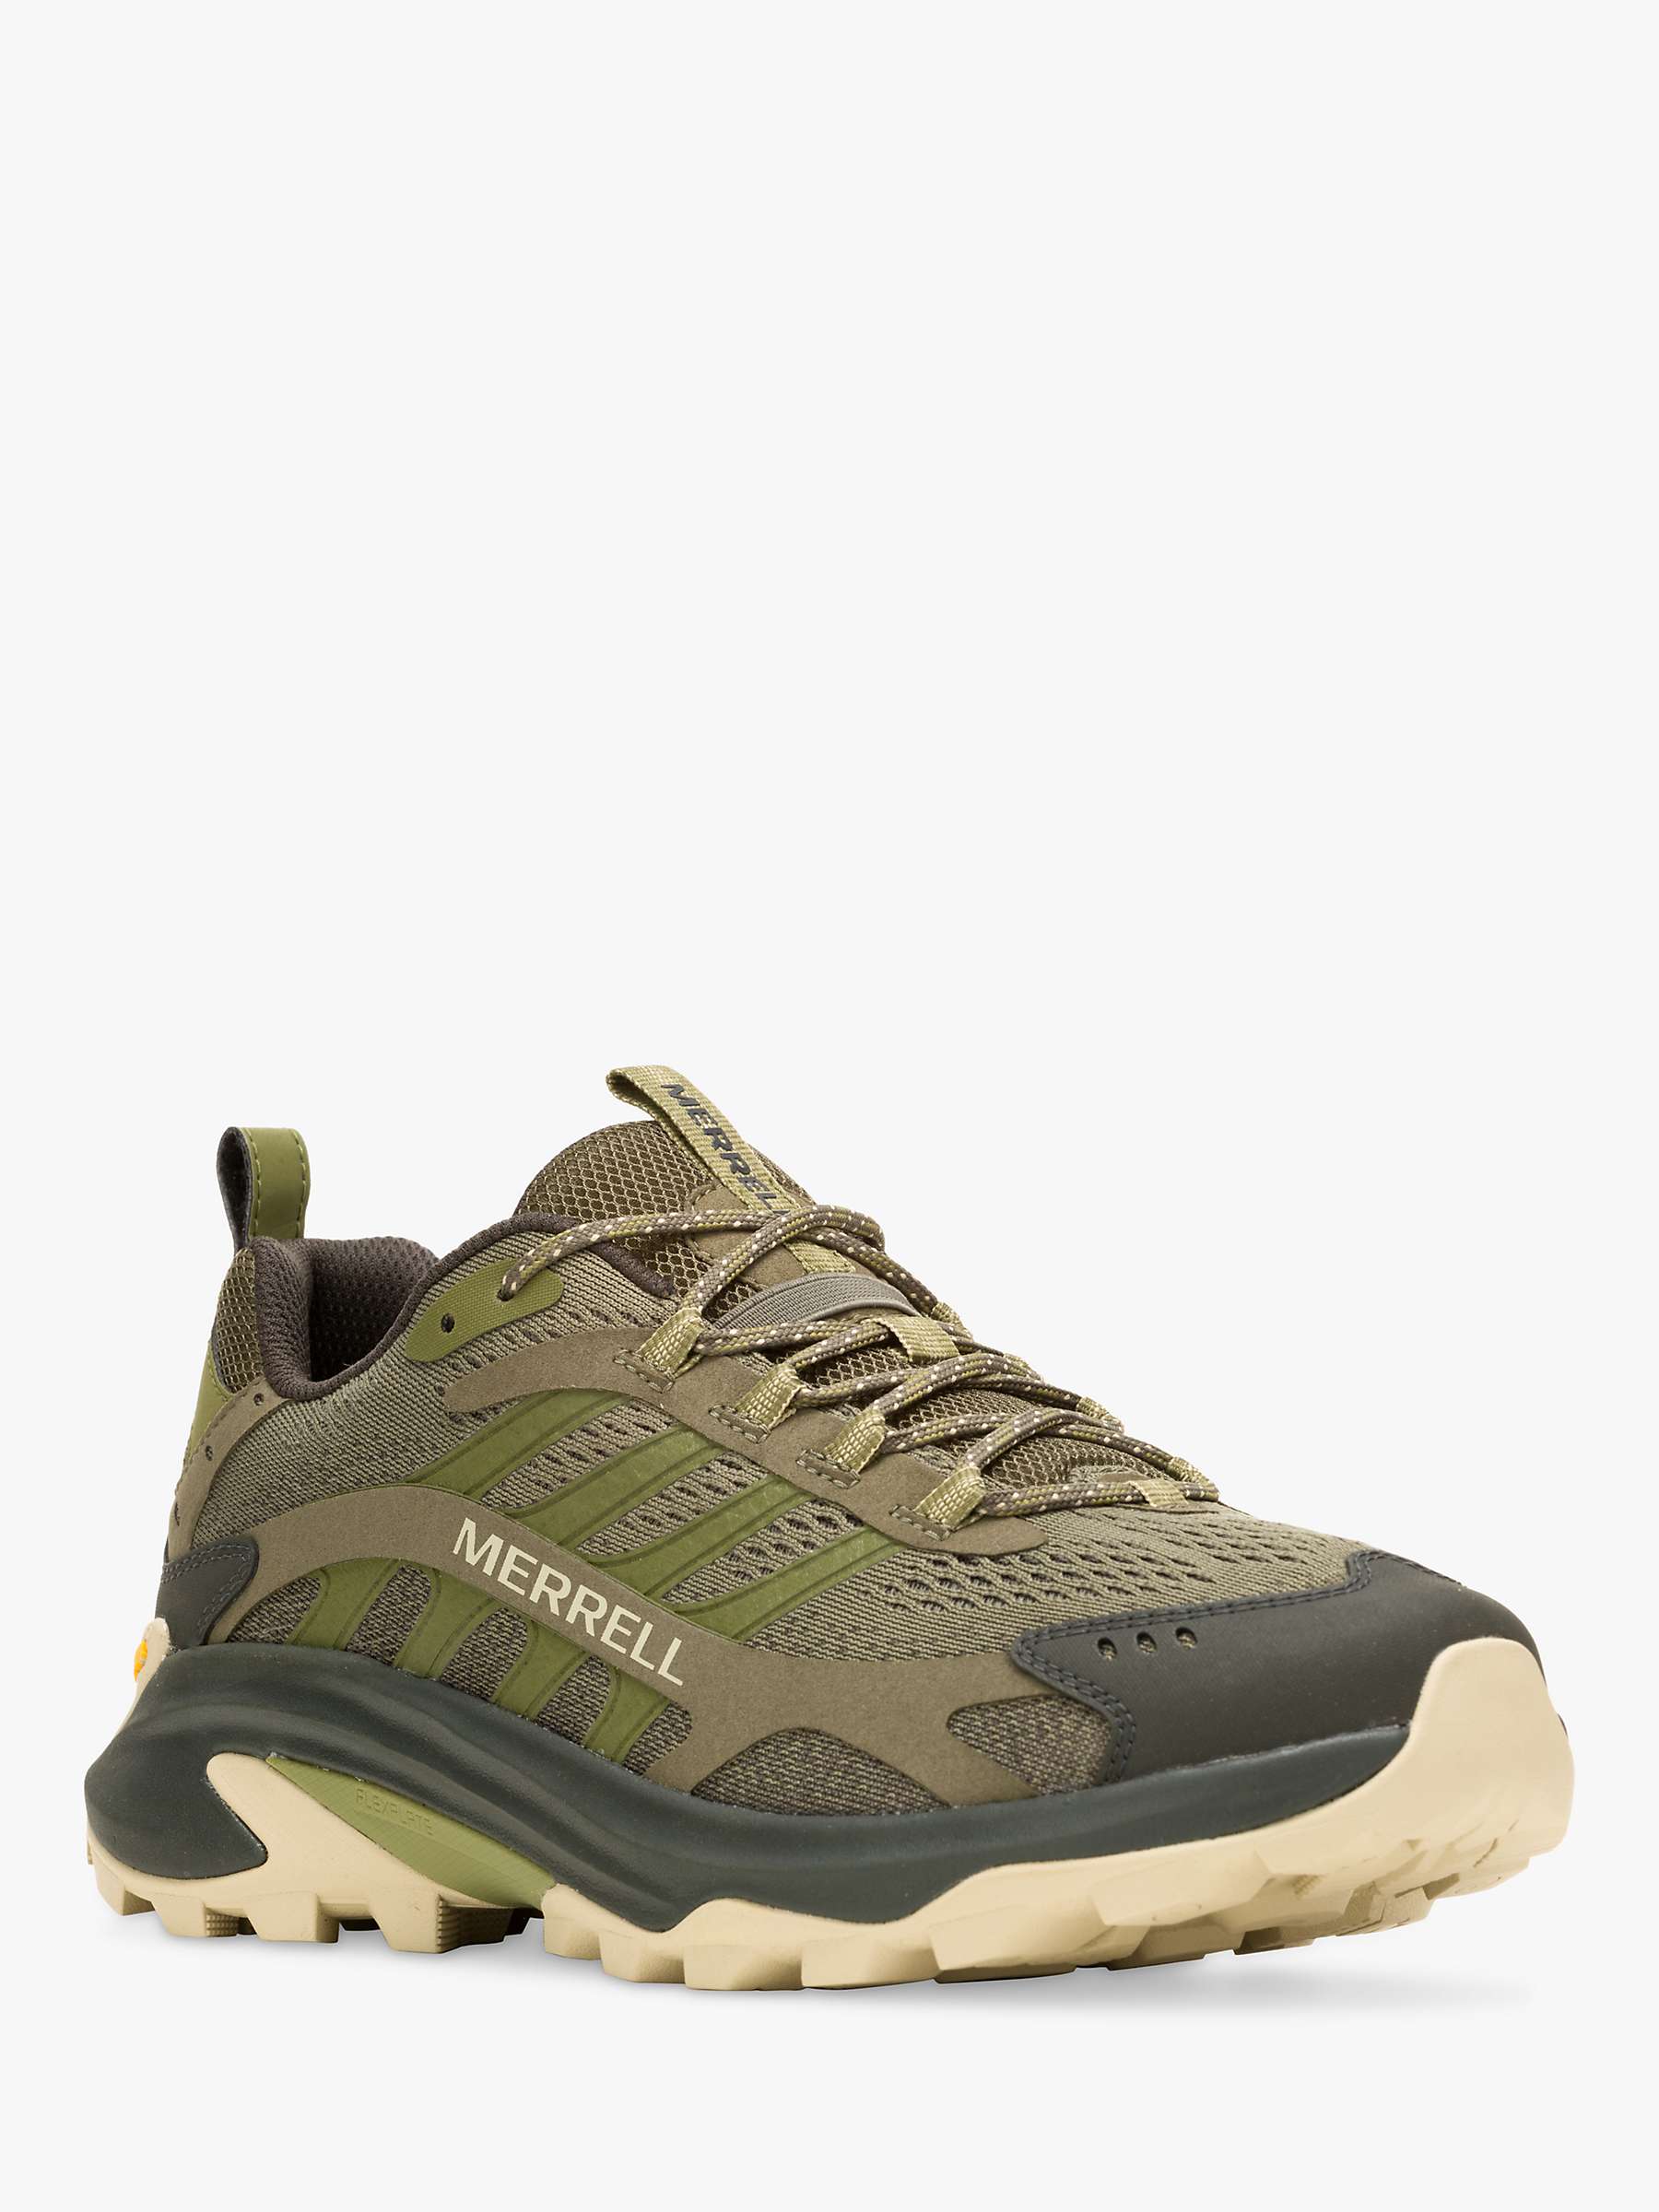 Buy Merrell Moab Speed 2 Men's Sports Shoes, Olive Online at johnlewis.com